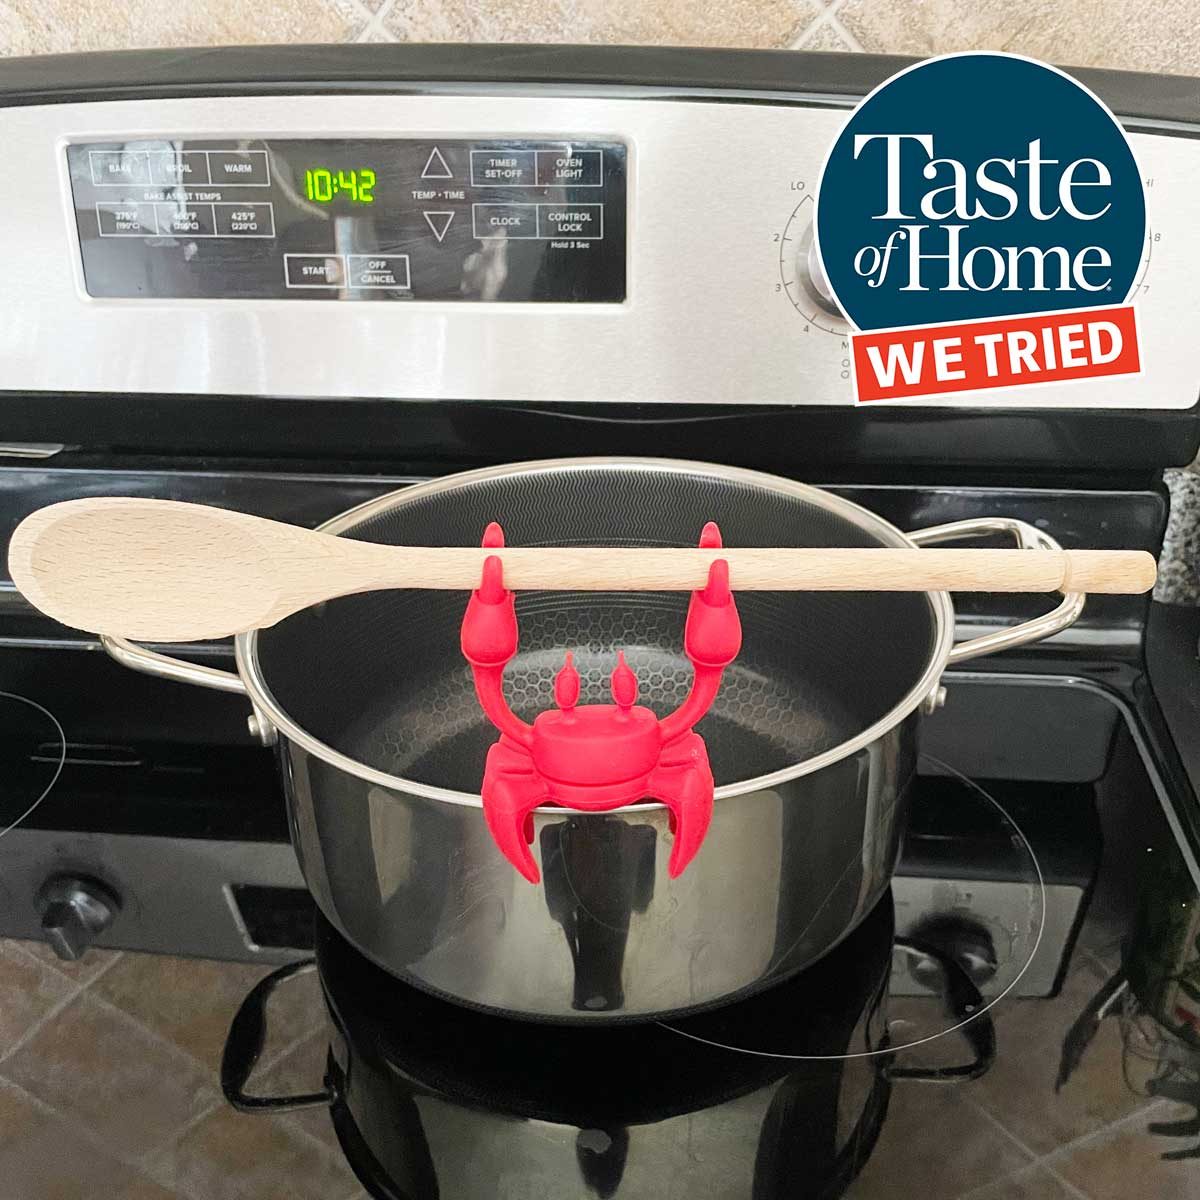 https://www.tasteofhome.com/wp-content/uploads/2022/10/TOH-We-Tried-crab-spoon.jpg